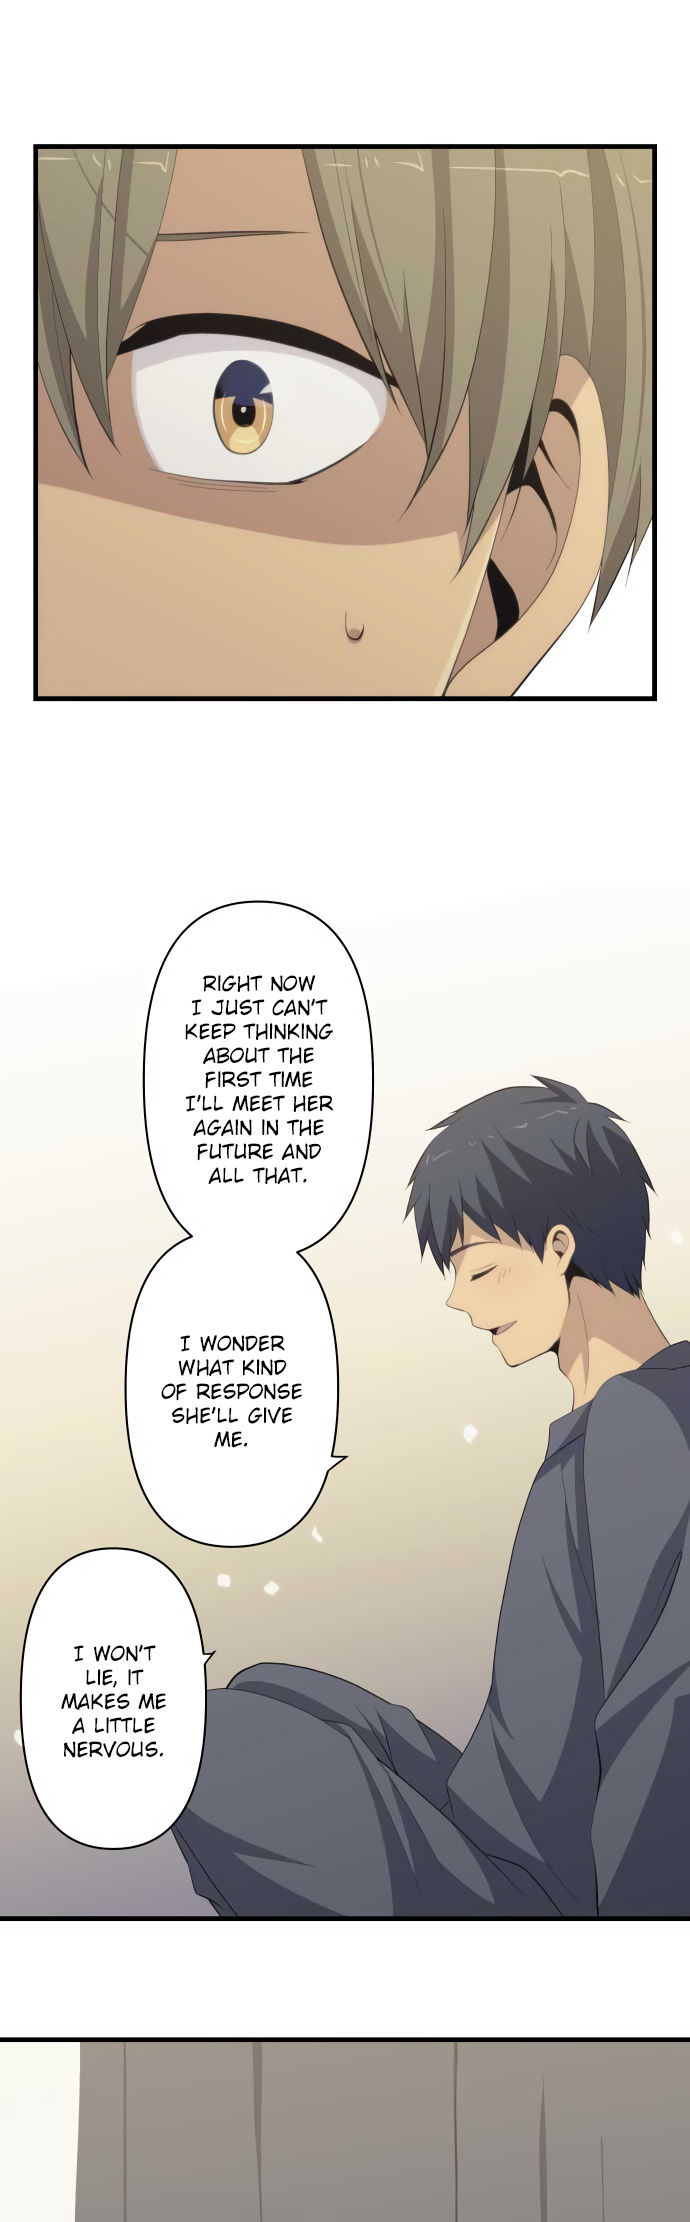 ReLIFE 199